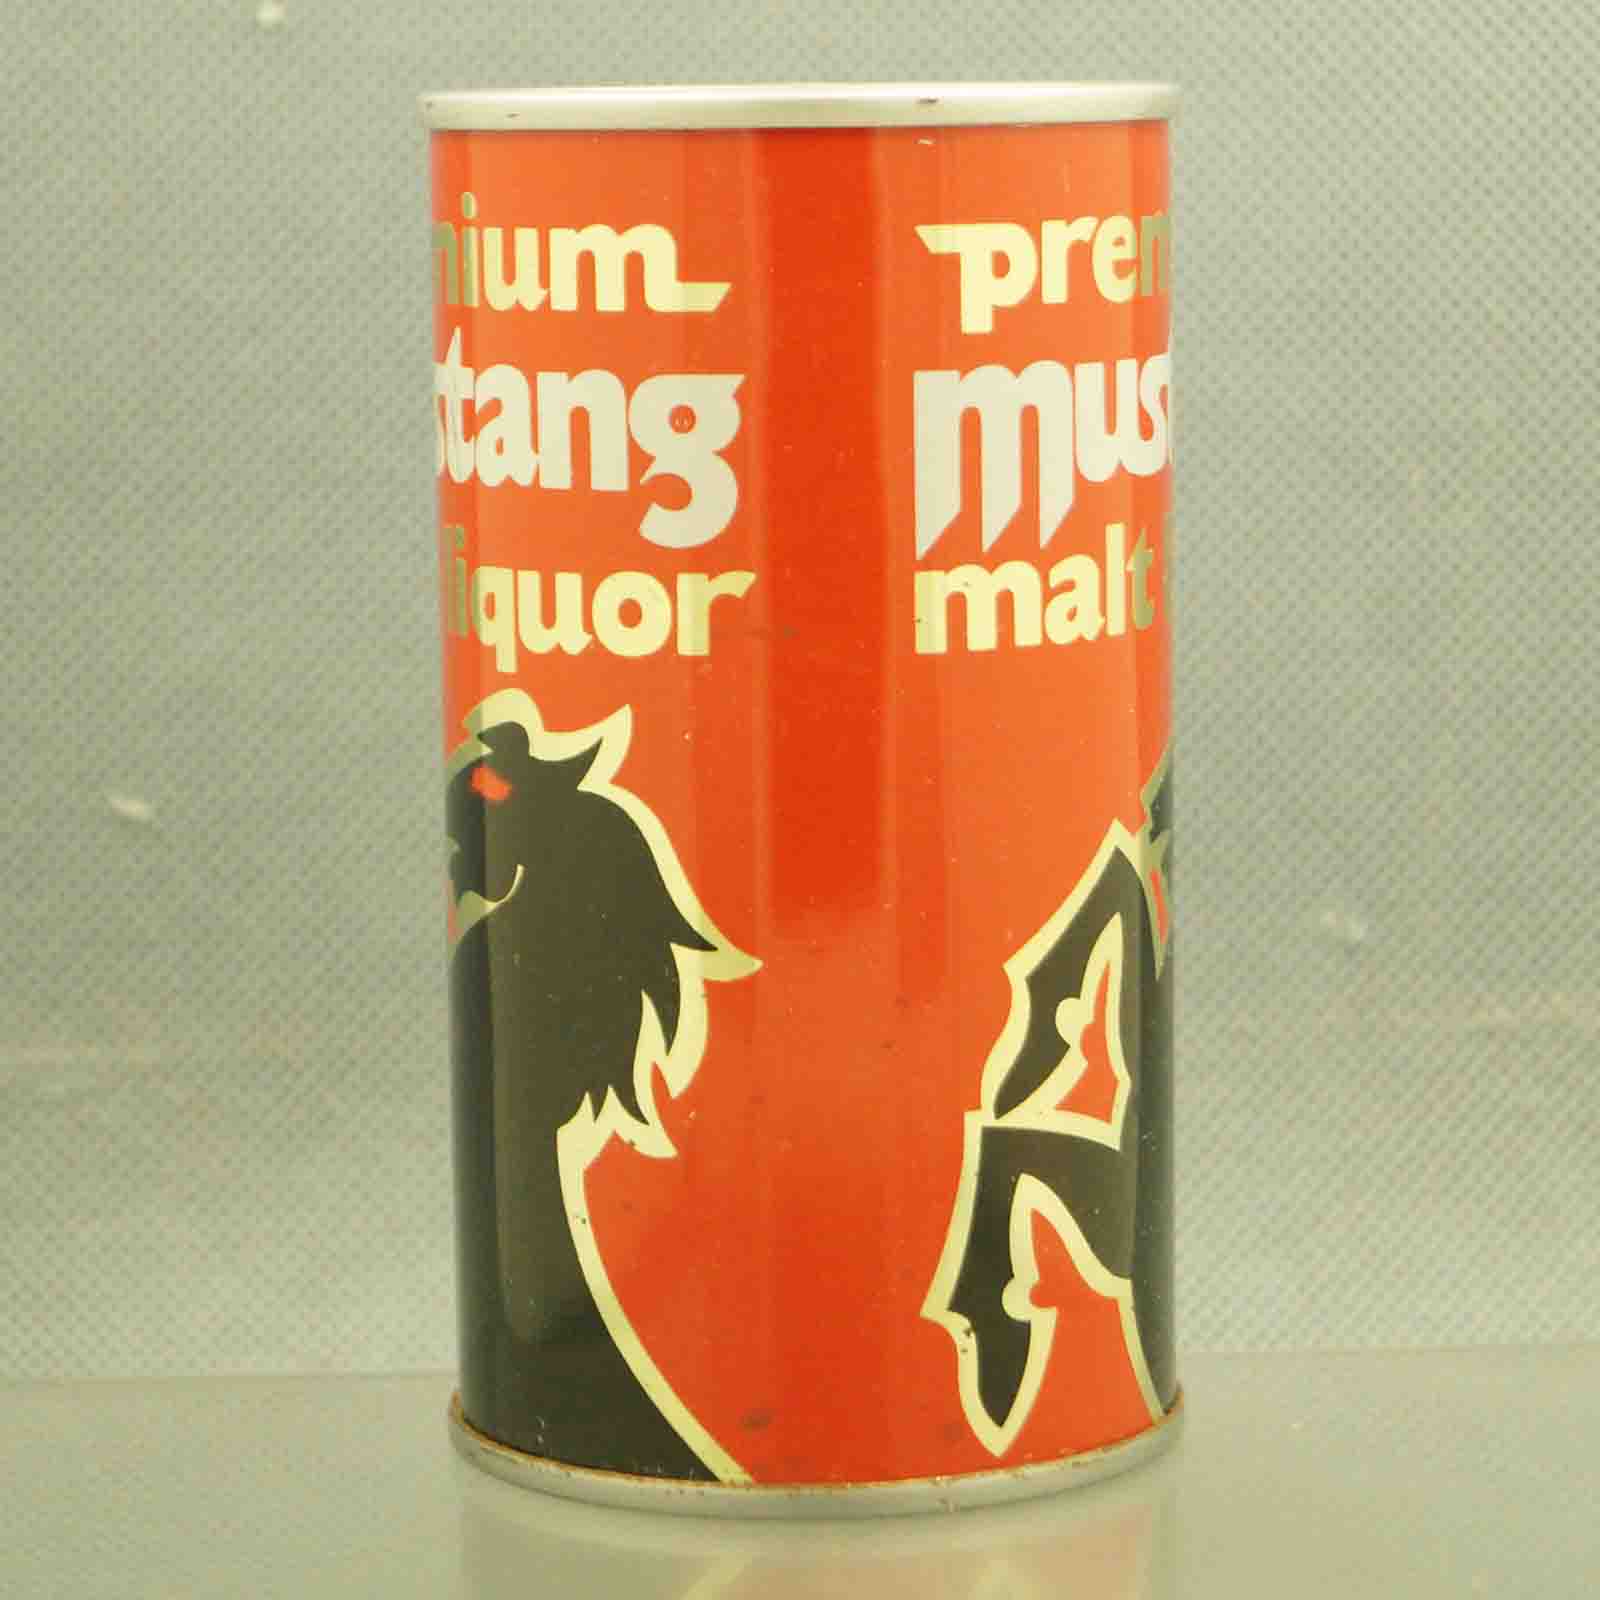 mustang 95-30 pull tab beer can 2